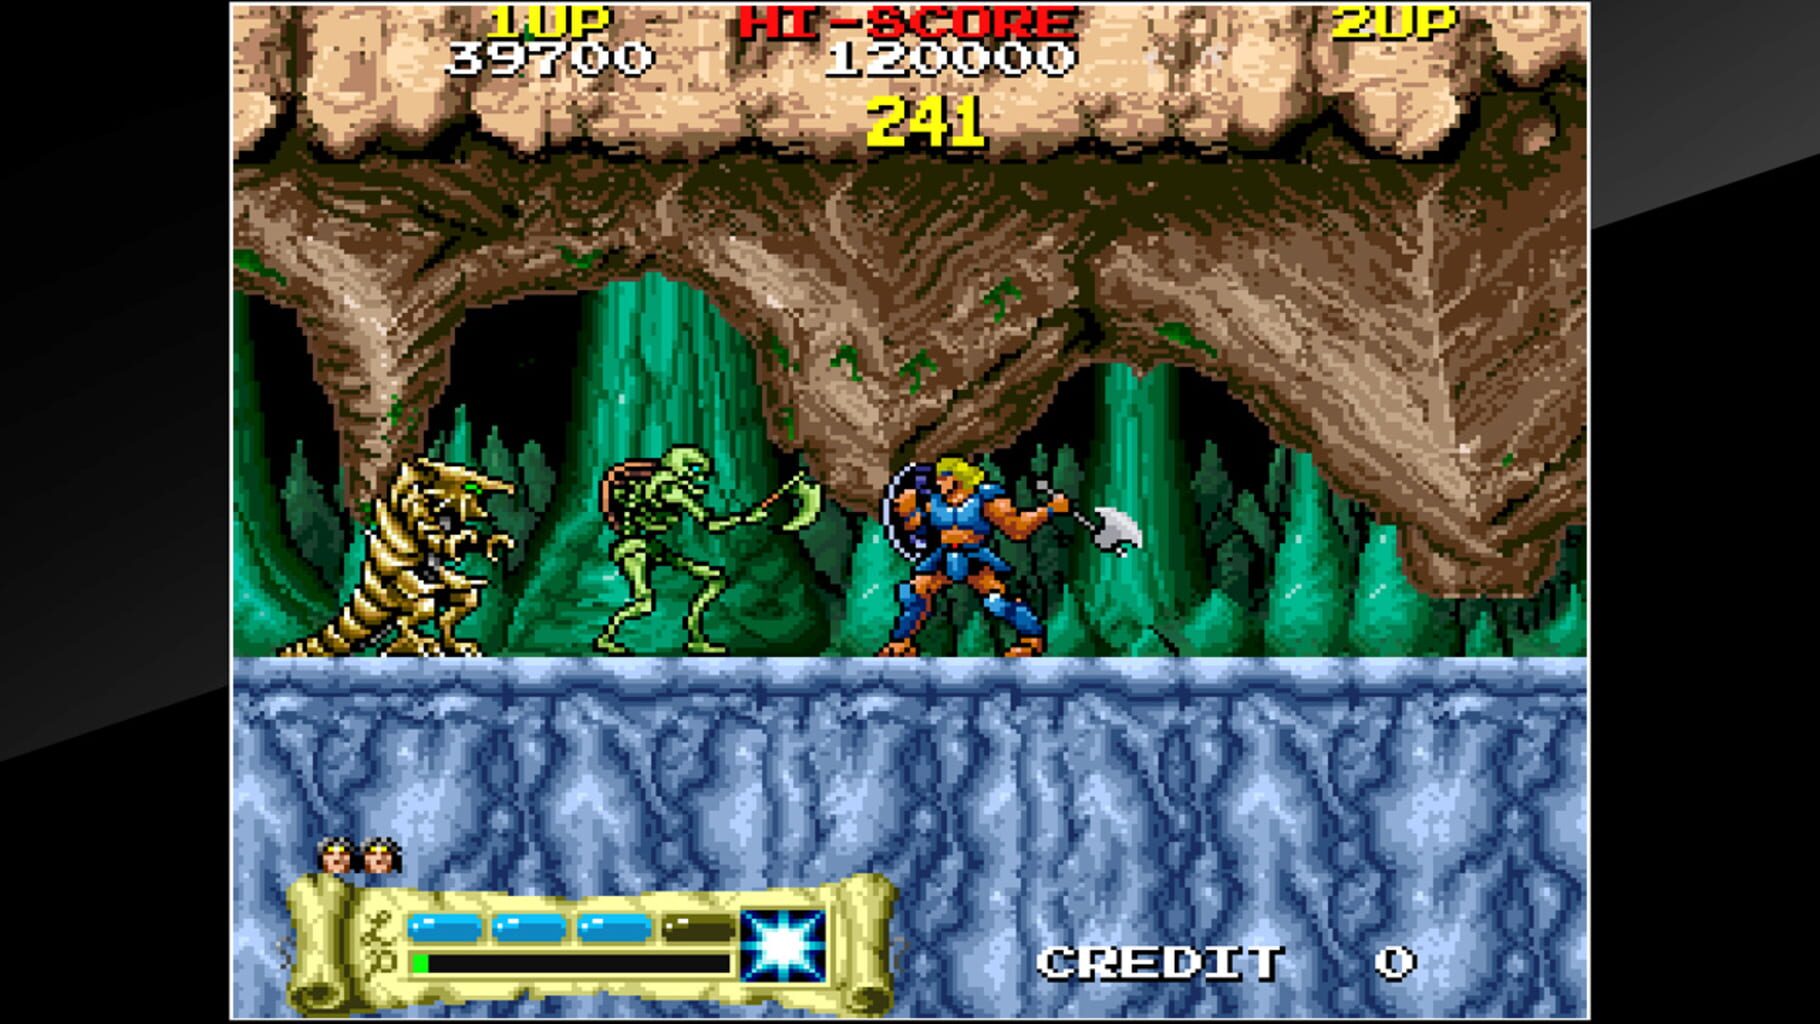 Arcade Archives: The Astyanax screenshot